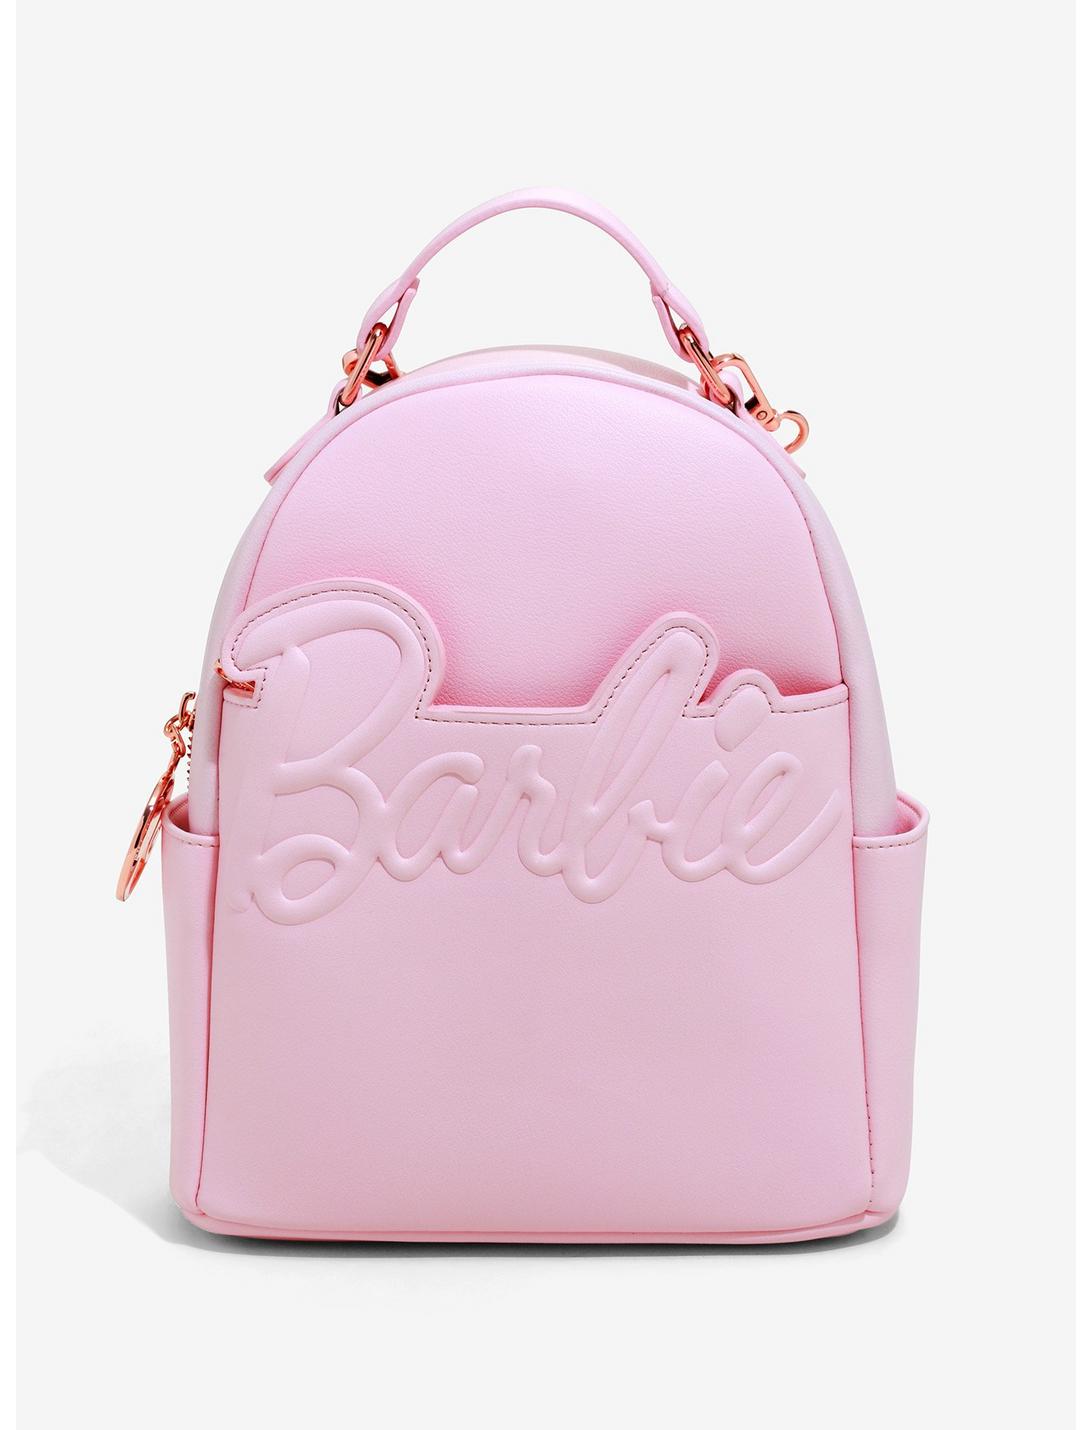 Loungefly Barbie Convertible Mini Backpack, , hi-res